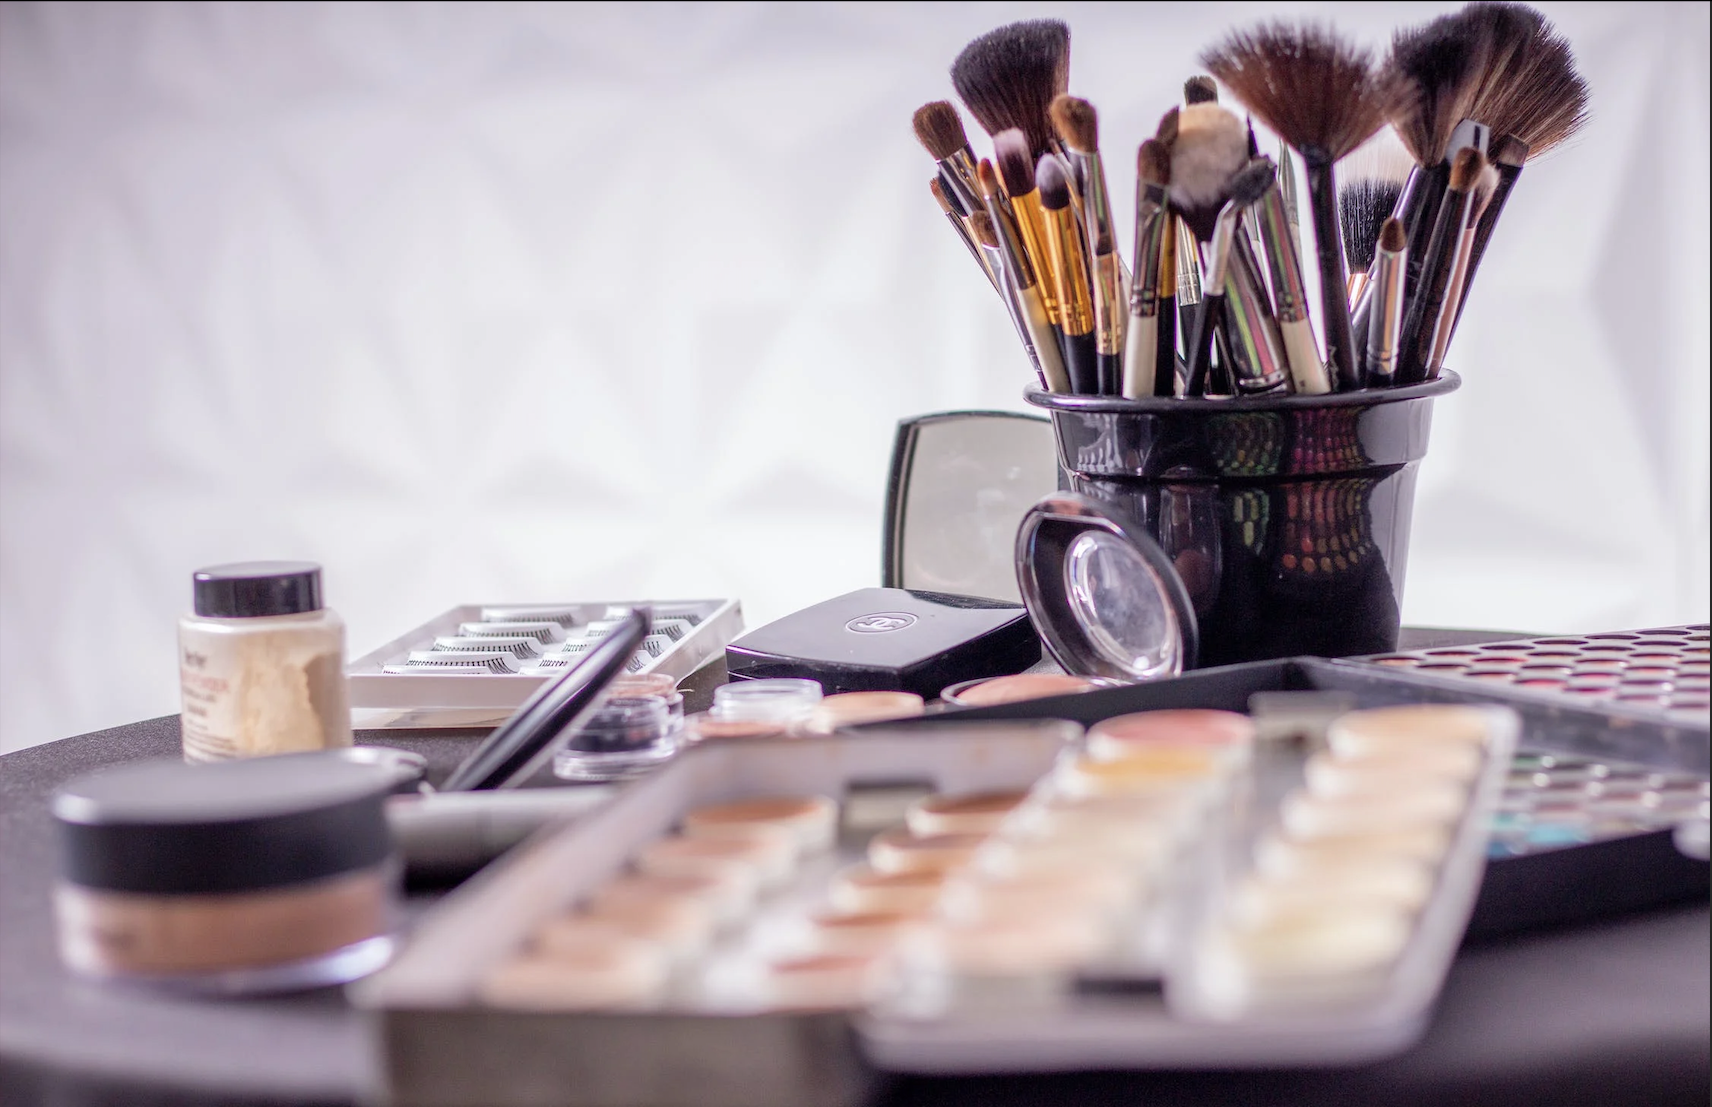 Globaldata’s Latest Report: China’s per Capita Spending on Makeup Reaches US$2.8, Eye Makeup Is Expected to Grow the Fastest